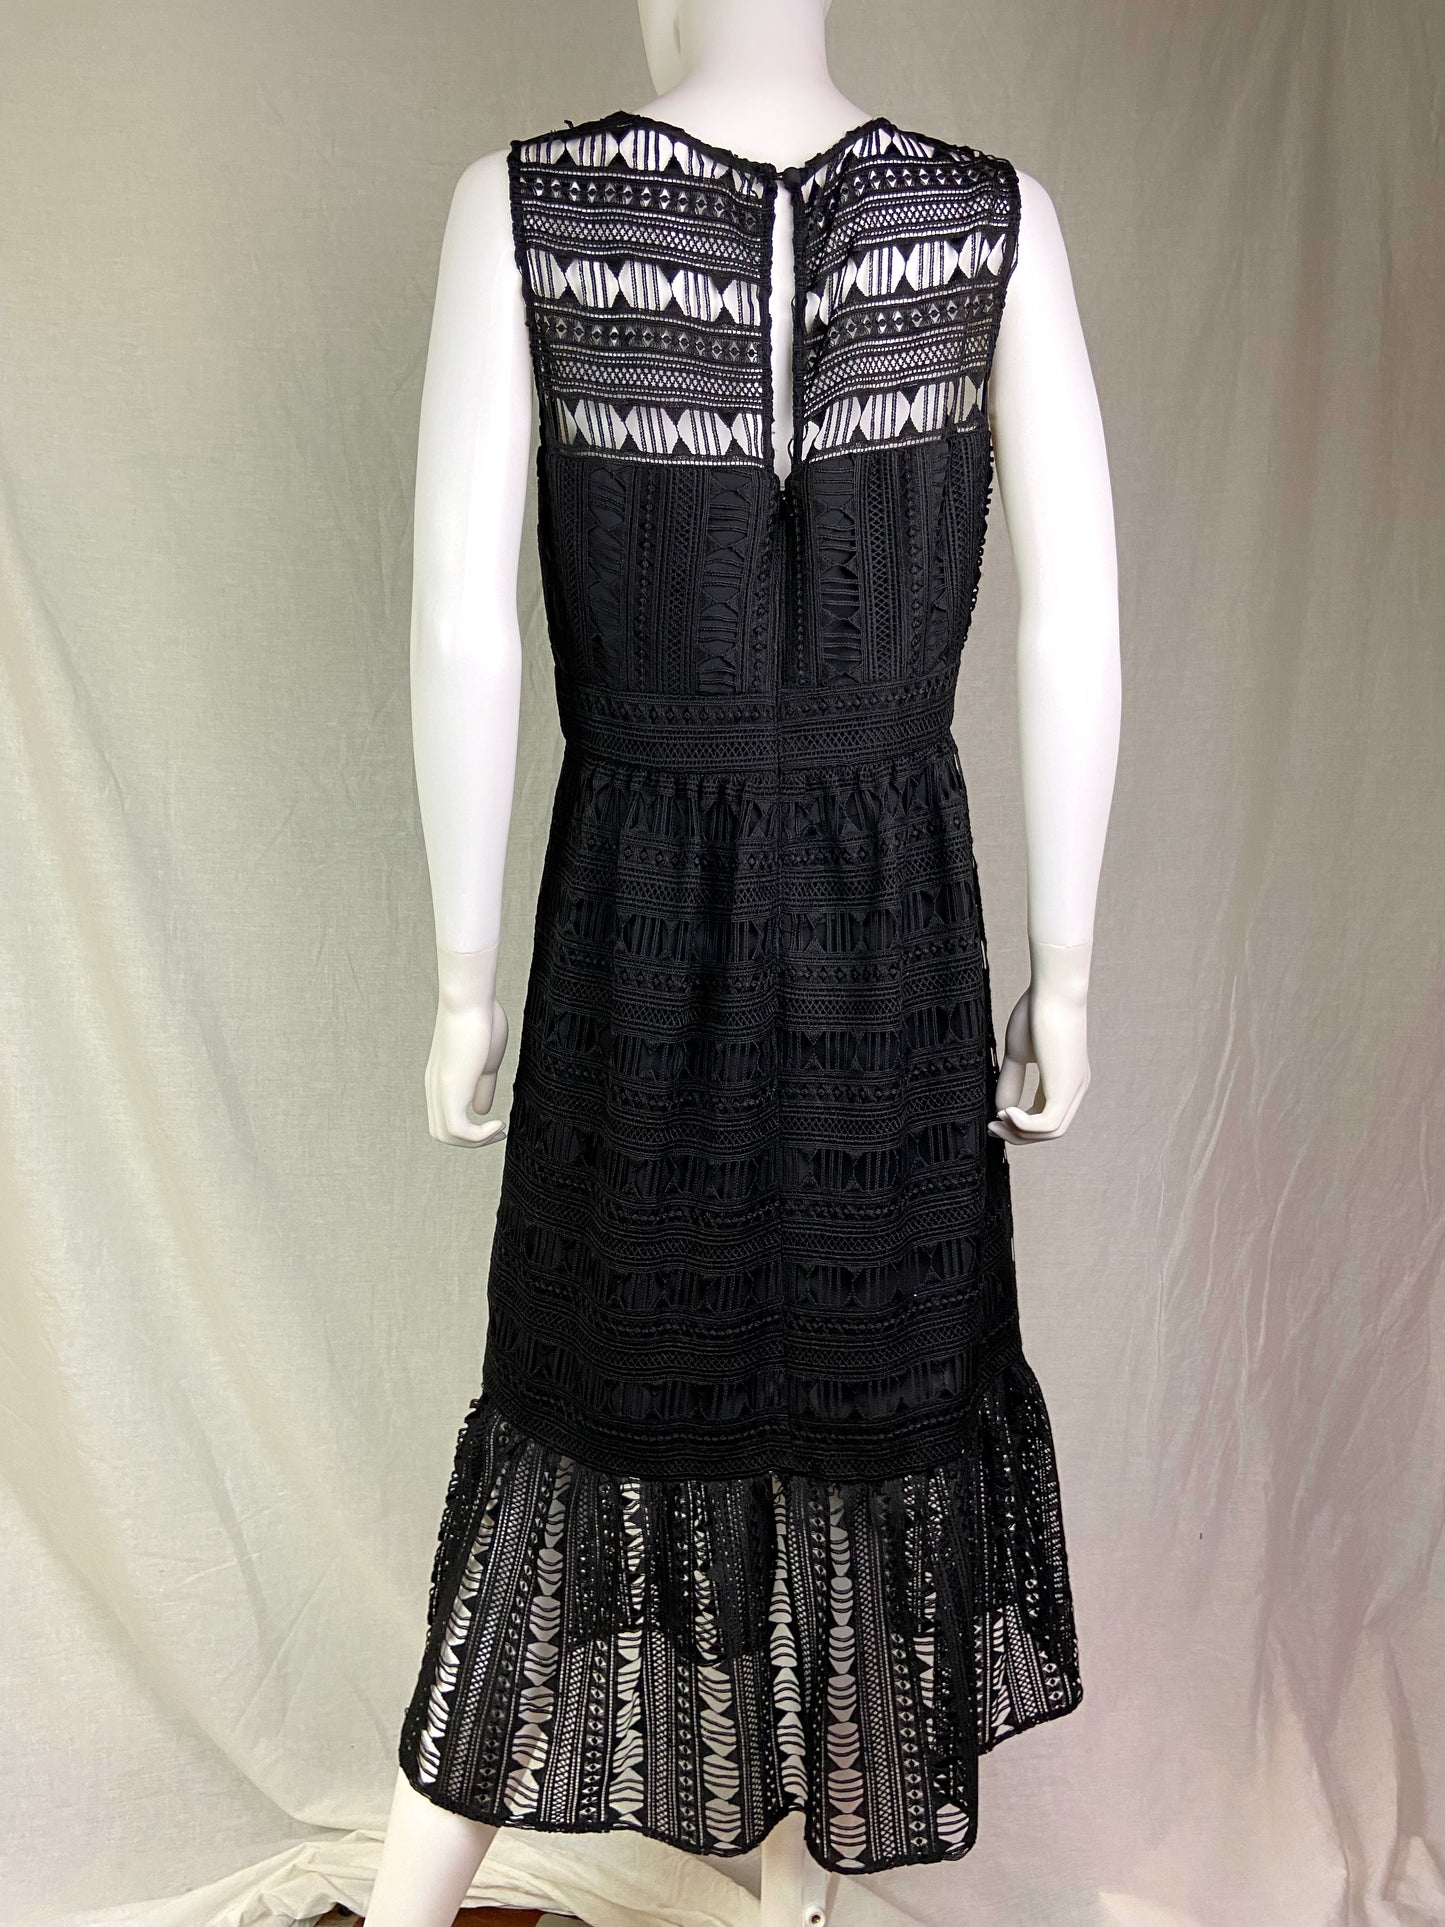 Nicole Miller Black Lace Woven Dress NWT